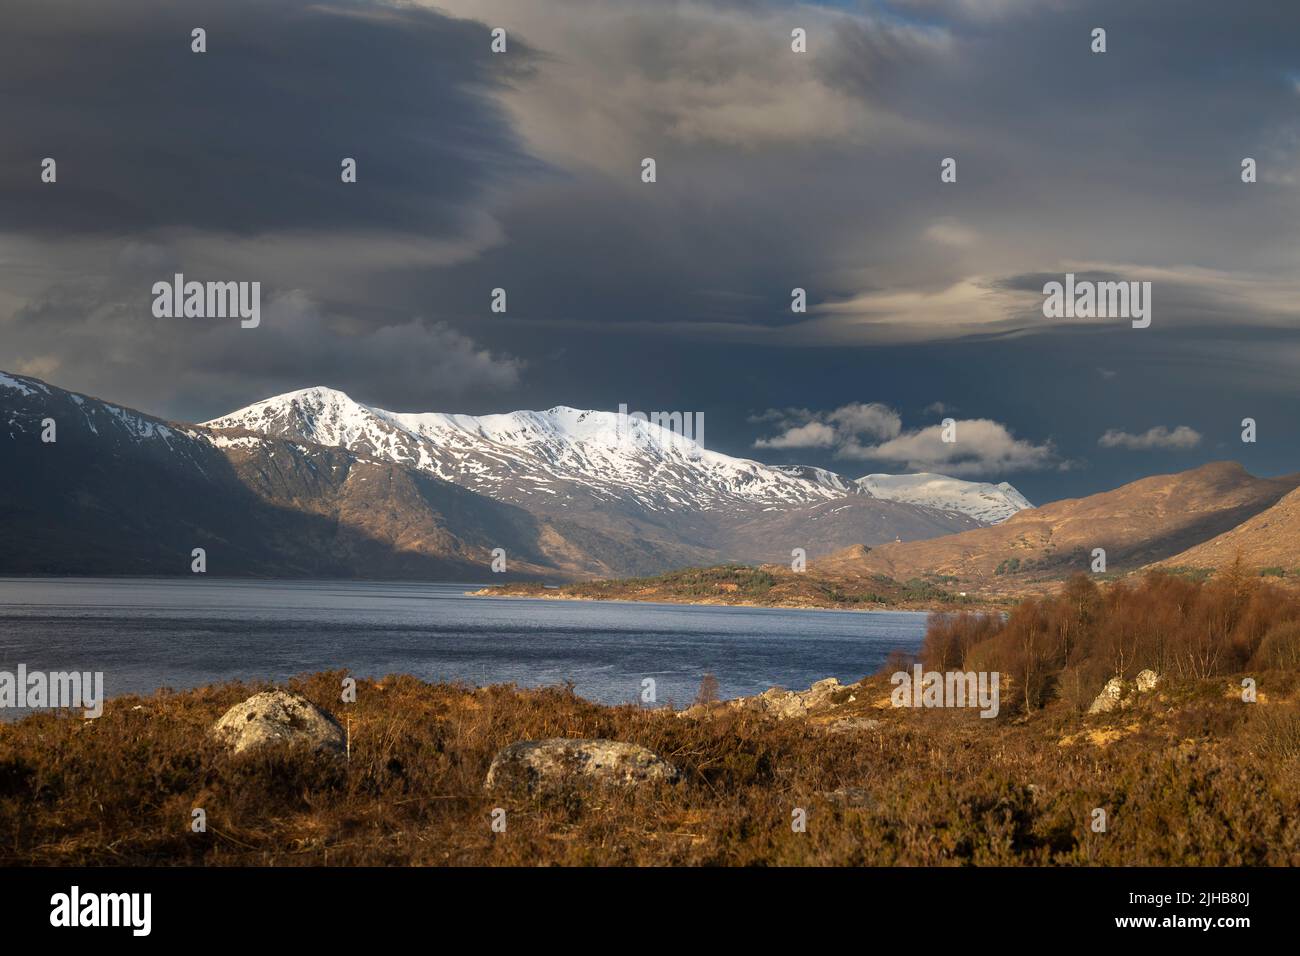 Snow Capped Mountains, Loch Cluanie, Highlands Scotland Stock Photo